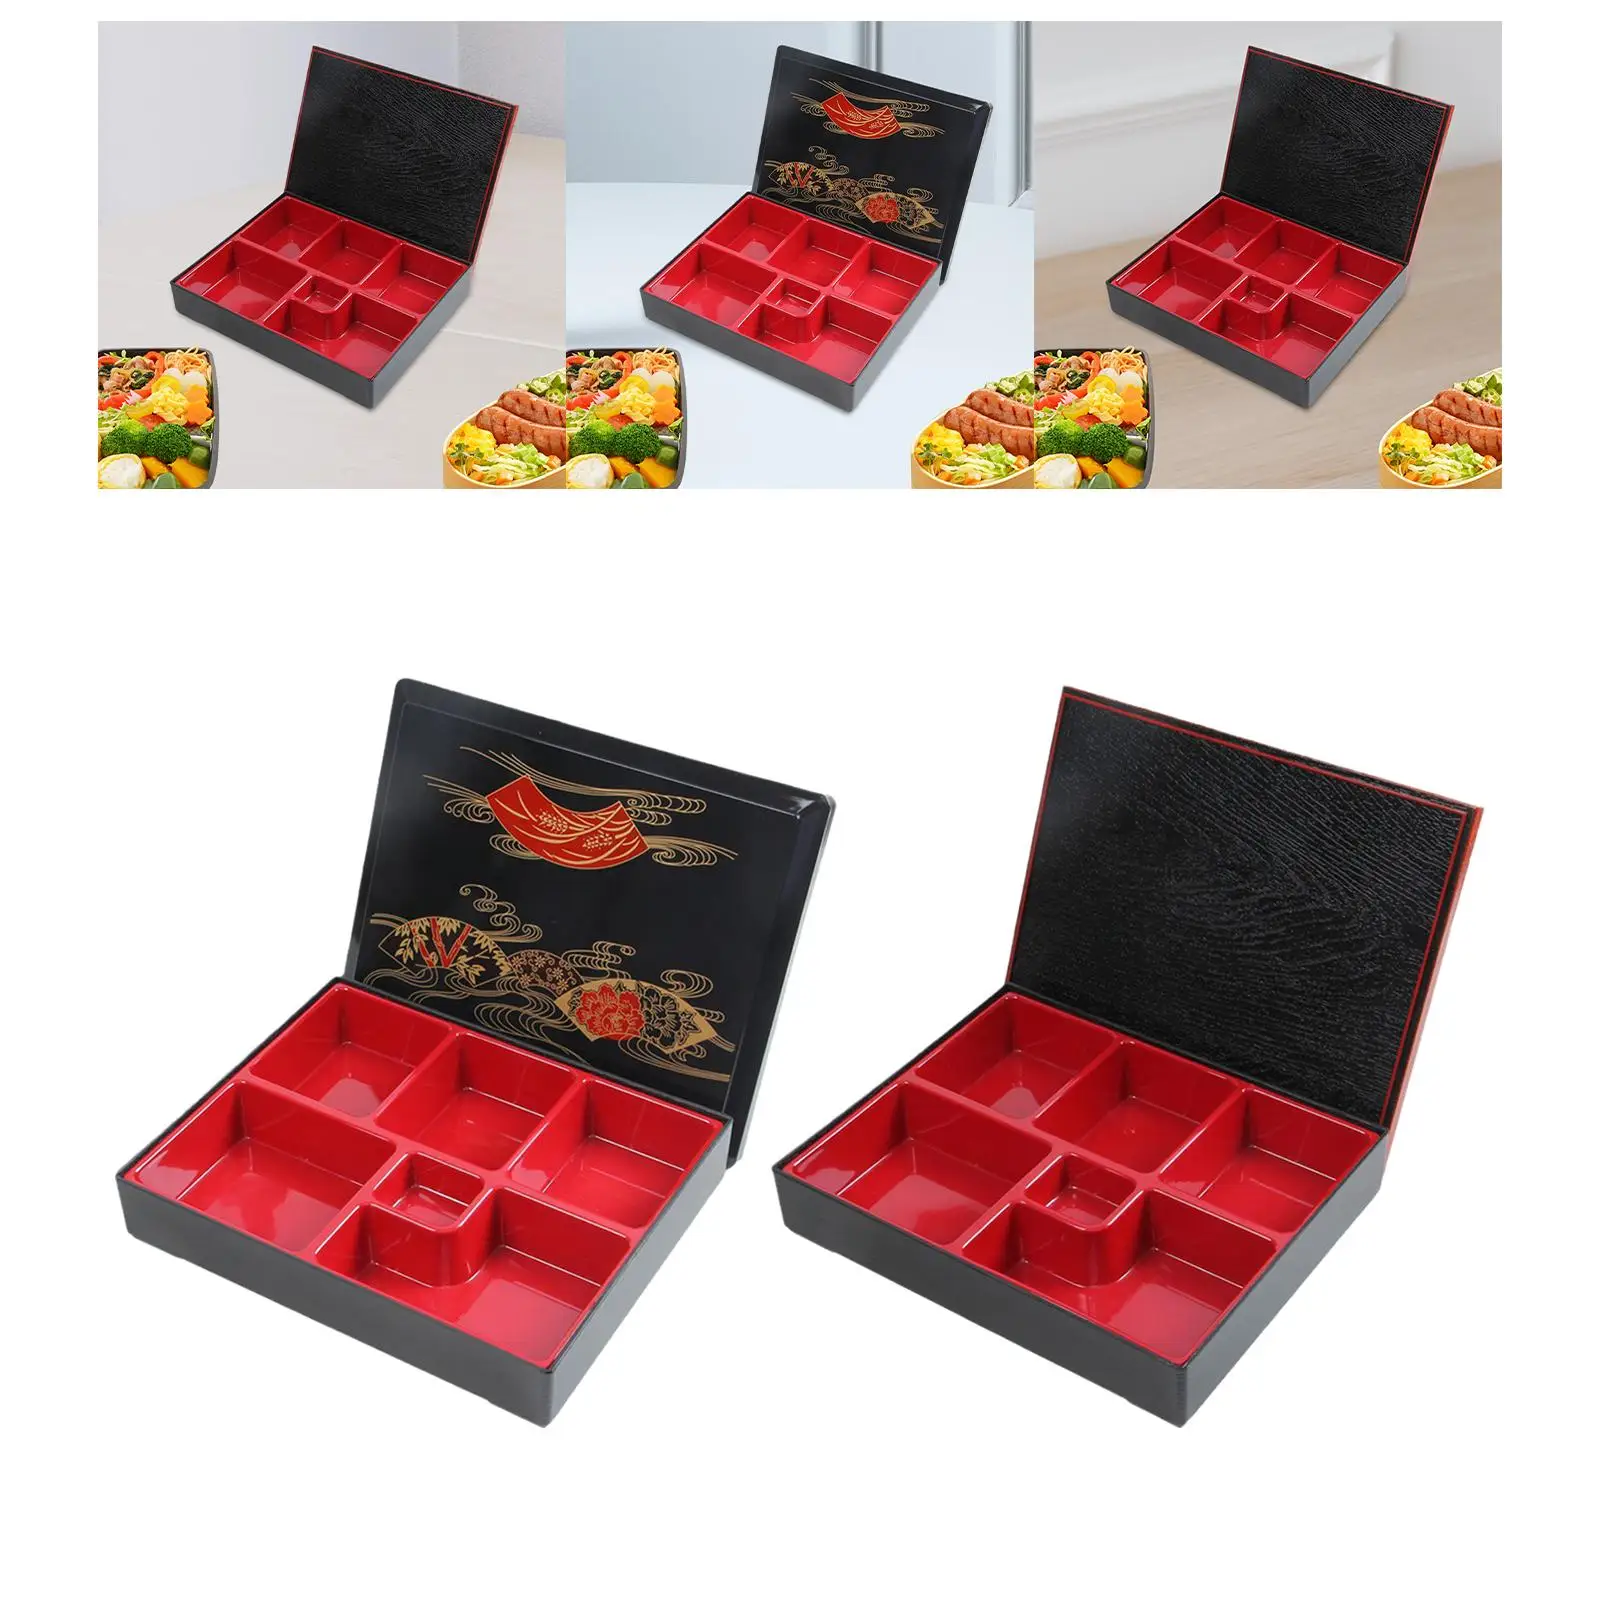 Japanese Bento Box Red and Black with Lid Snack Serving Tray Serving Dish for Picnic Restaurant Office Home Sushi, Rice, Sauce